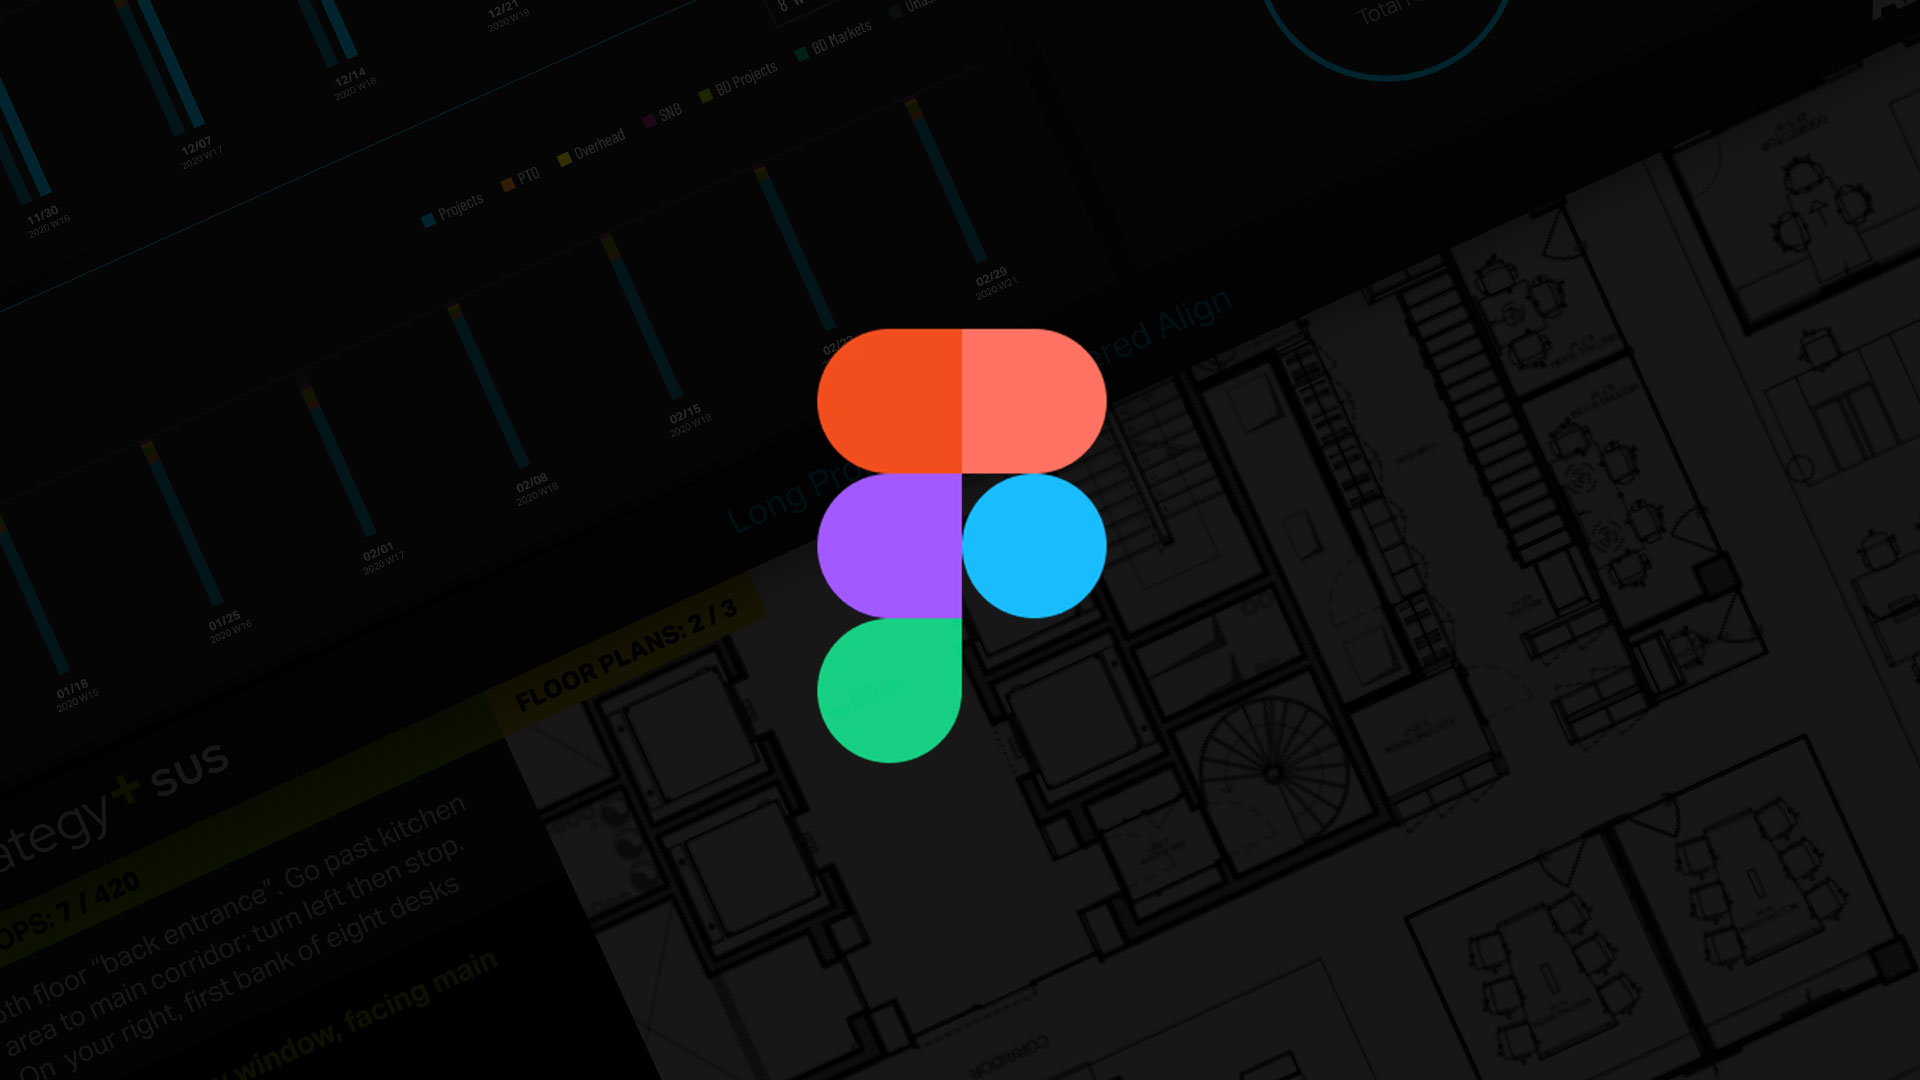 Design, Prototype, Collaborate with Figma